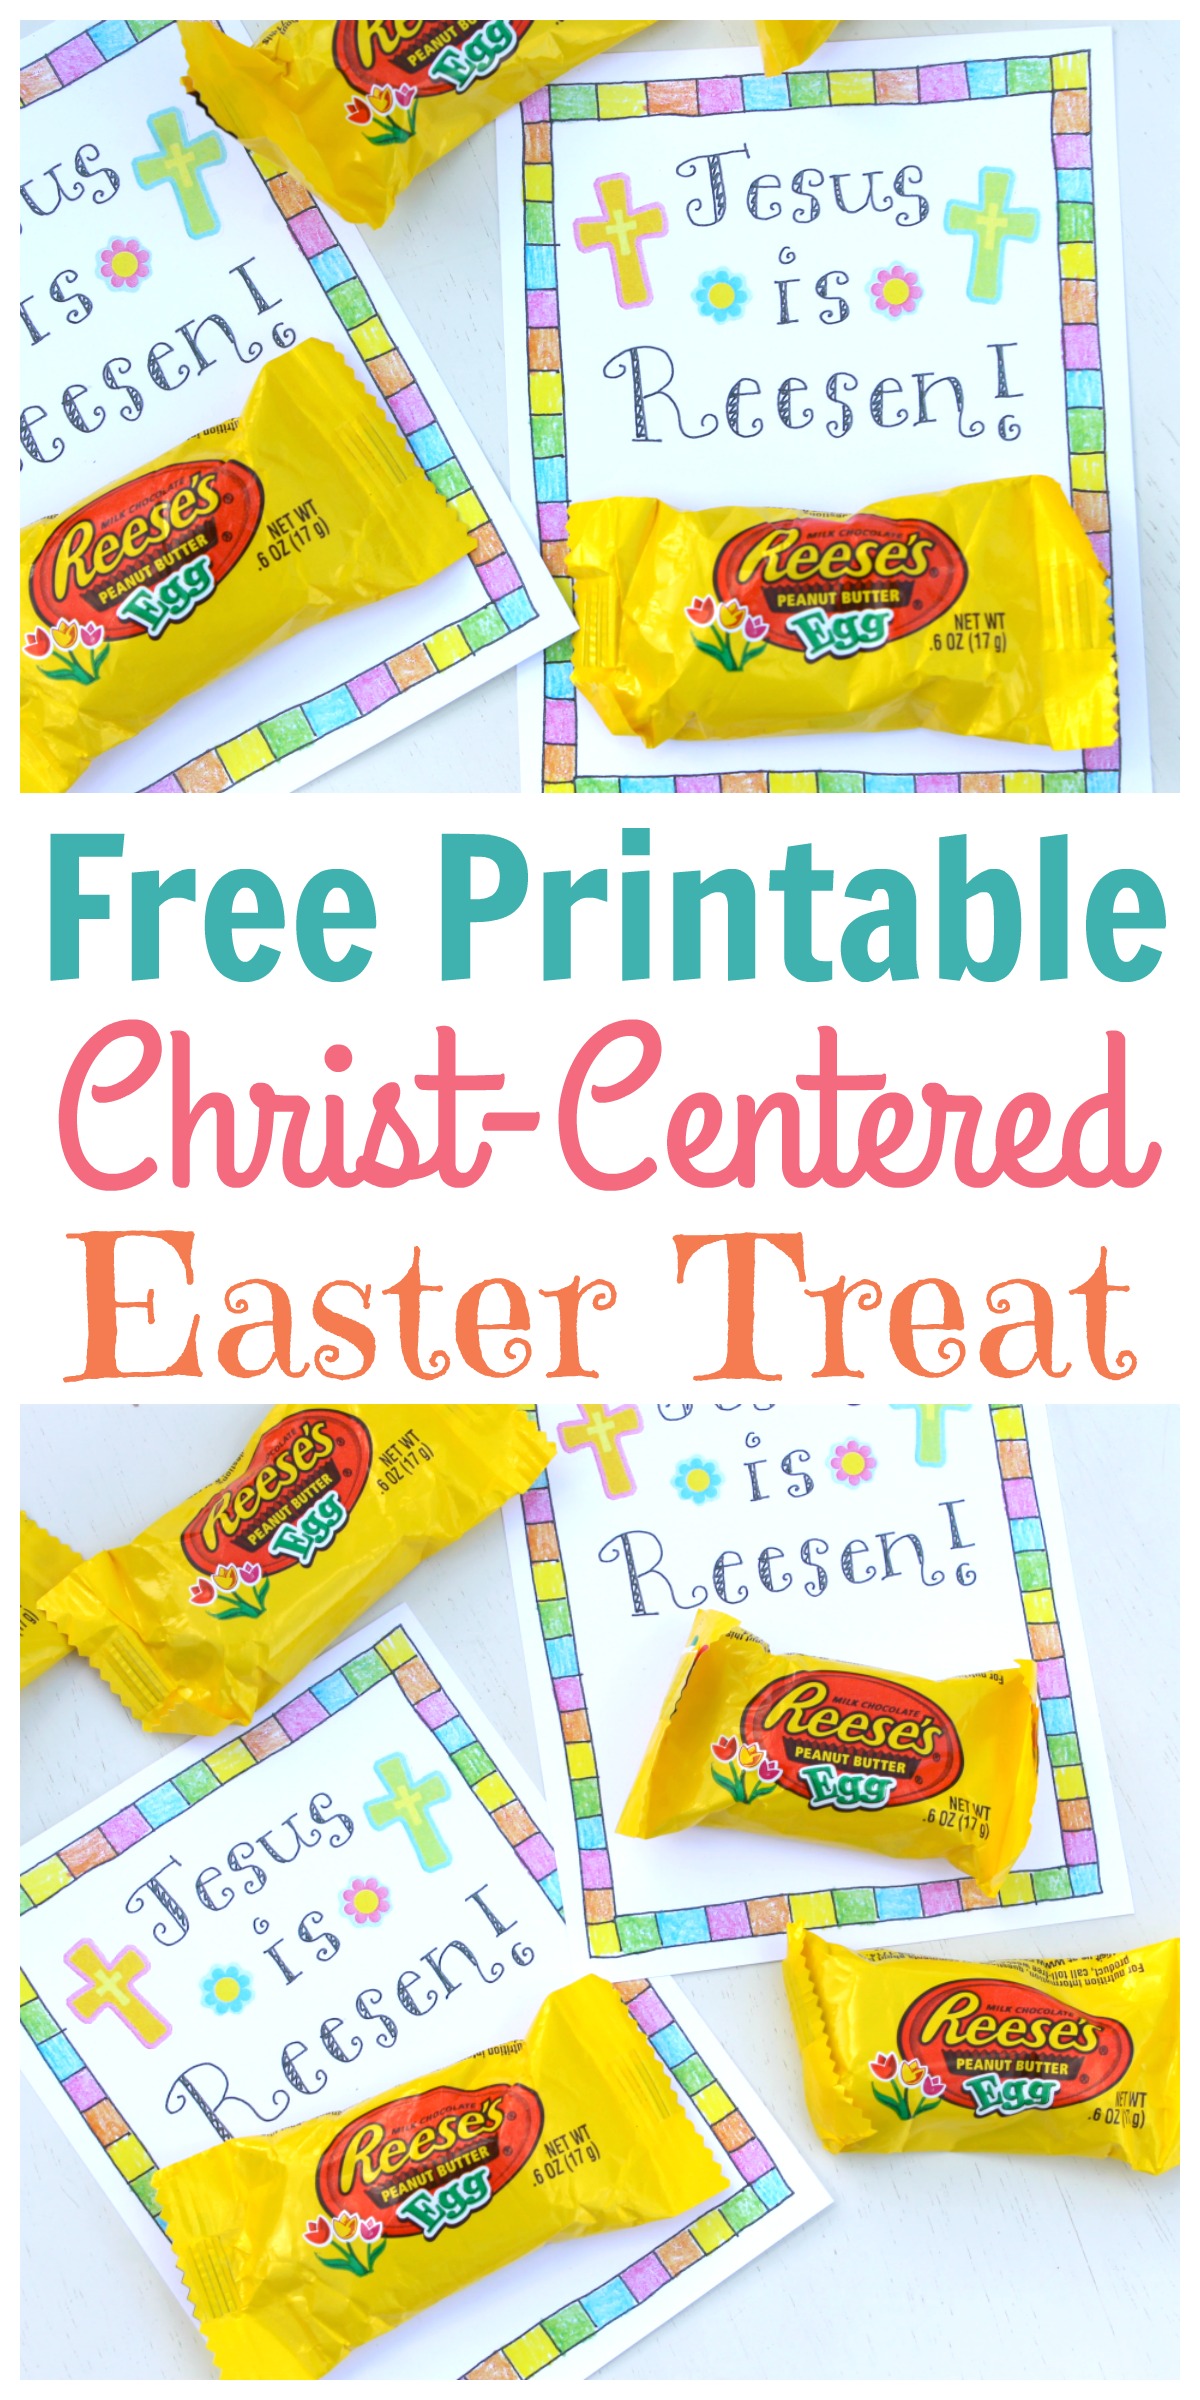 free-printable-religious-easter-gift-tags-printable-word-searches